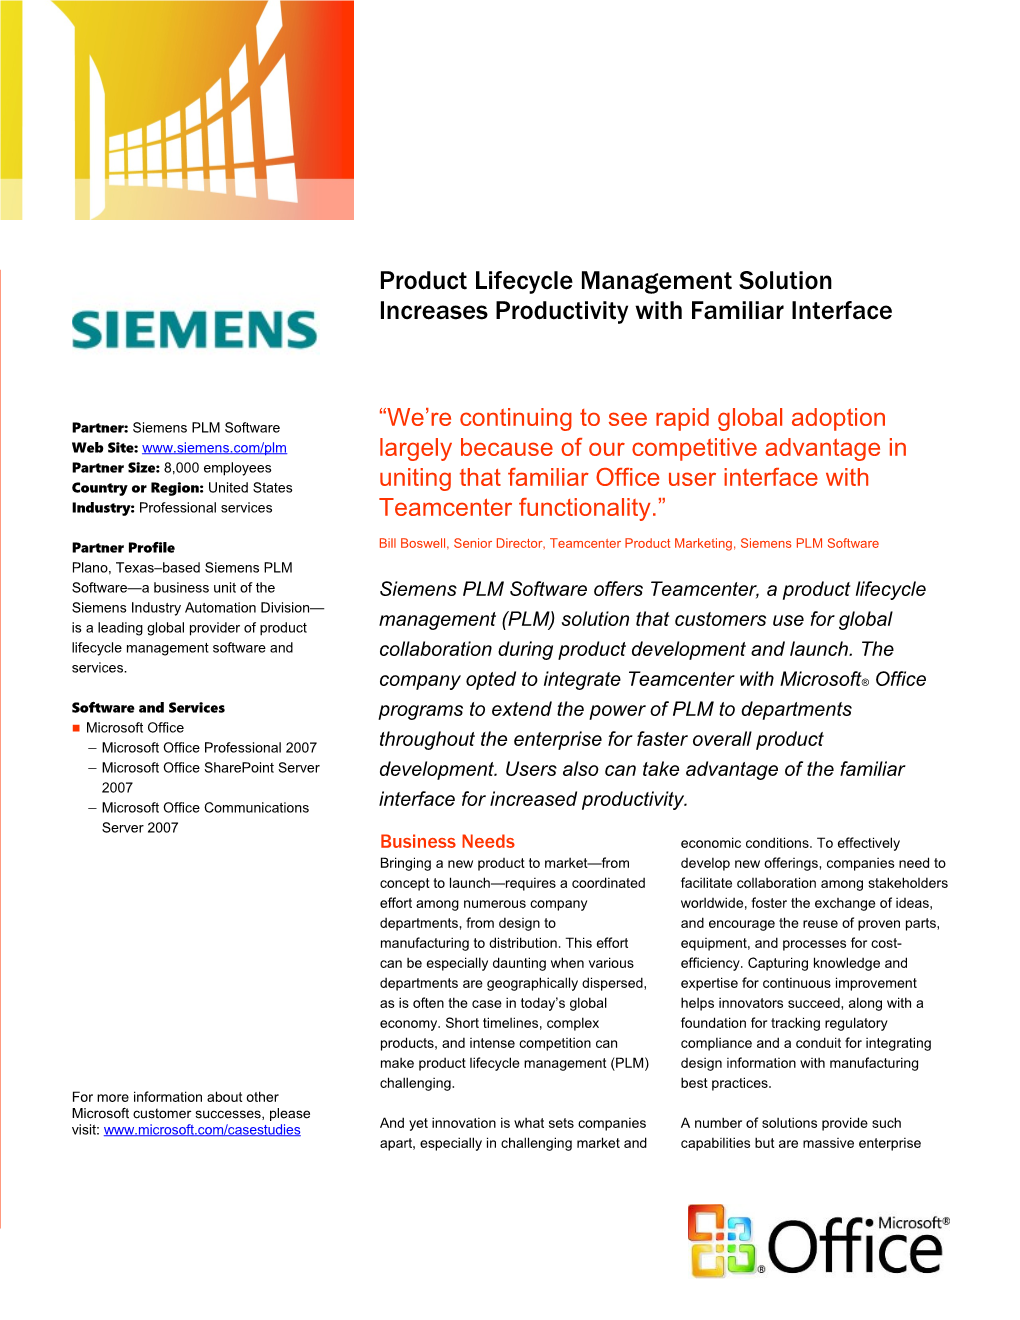 Product Lifecycle Management Solution Increases Productivity with Familiar Interface